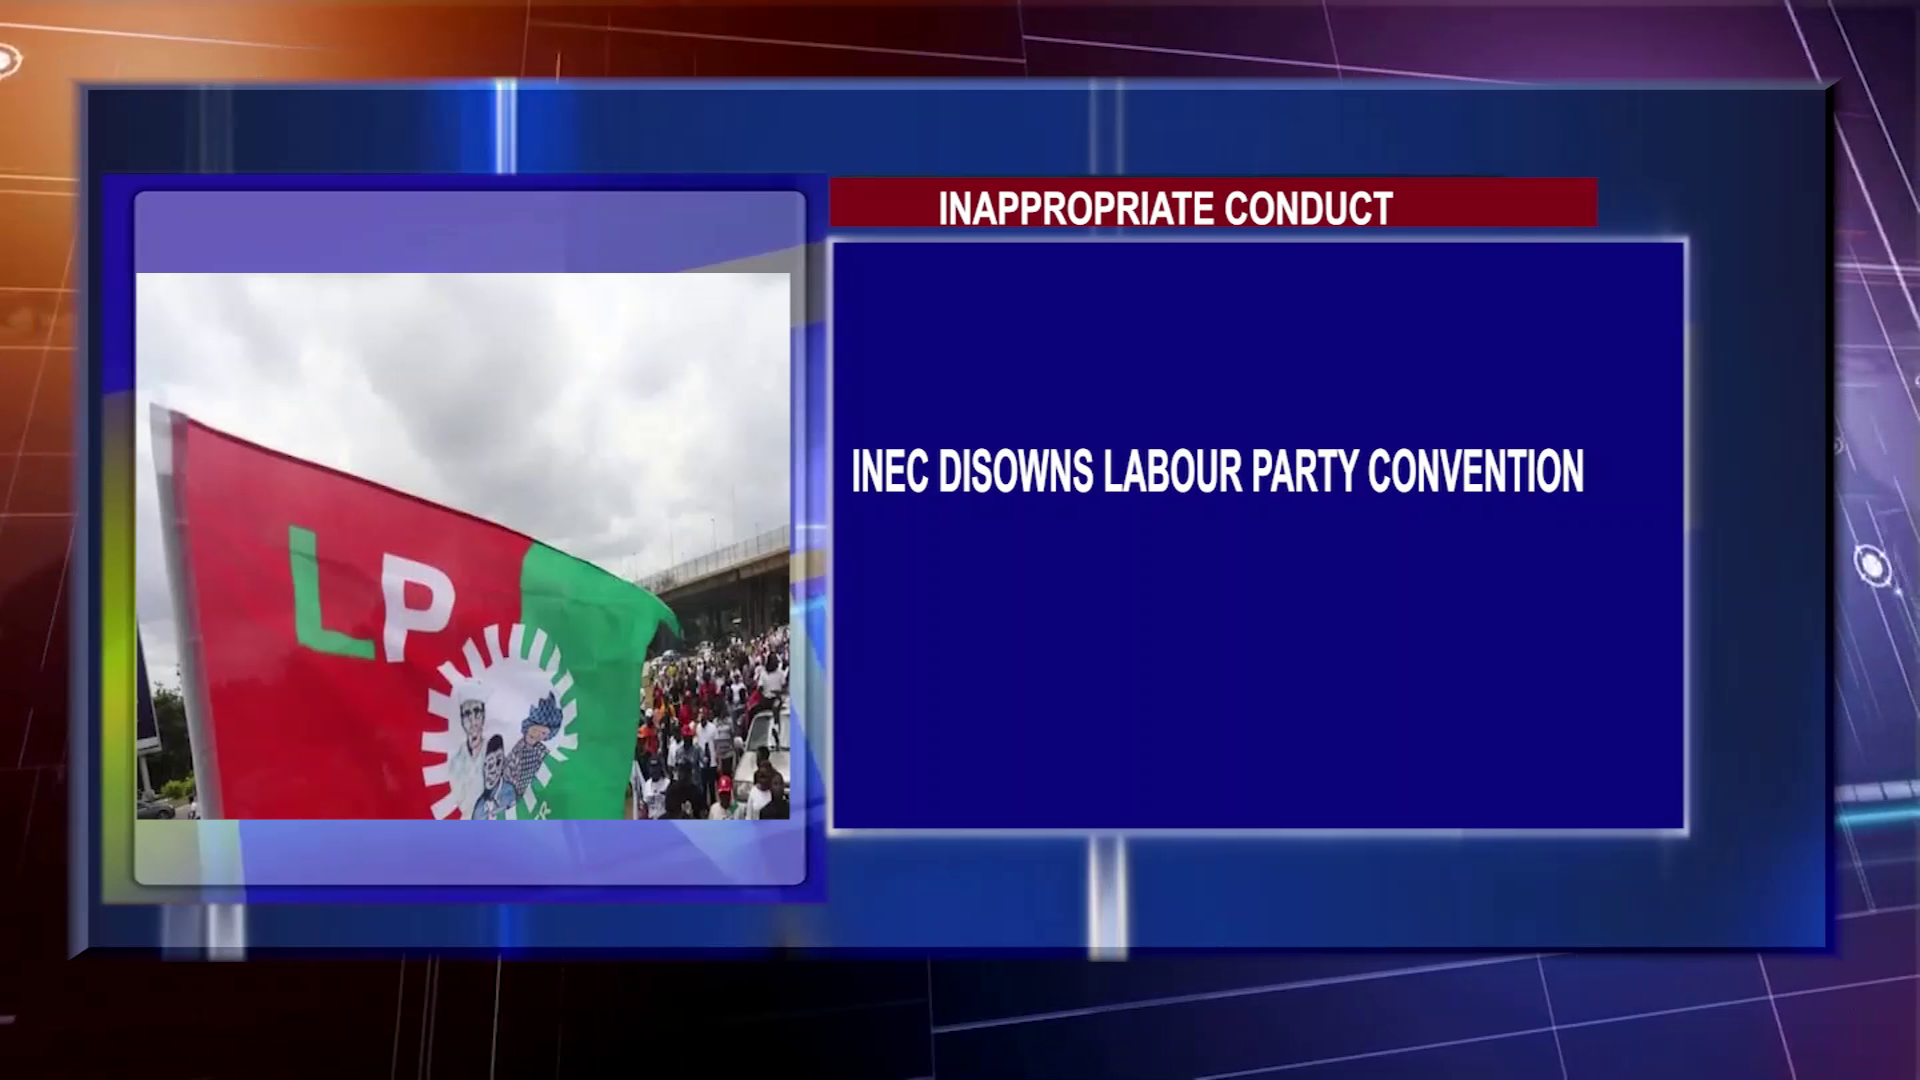 INEC Disowns Labour Party Convention